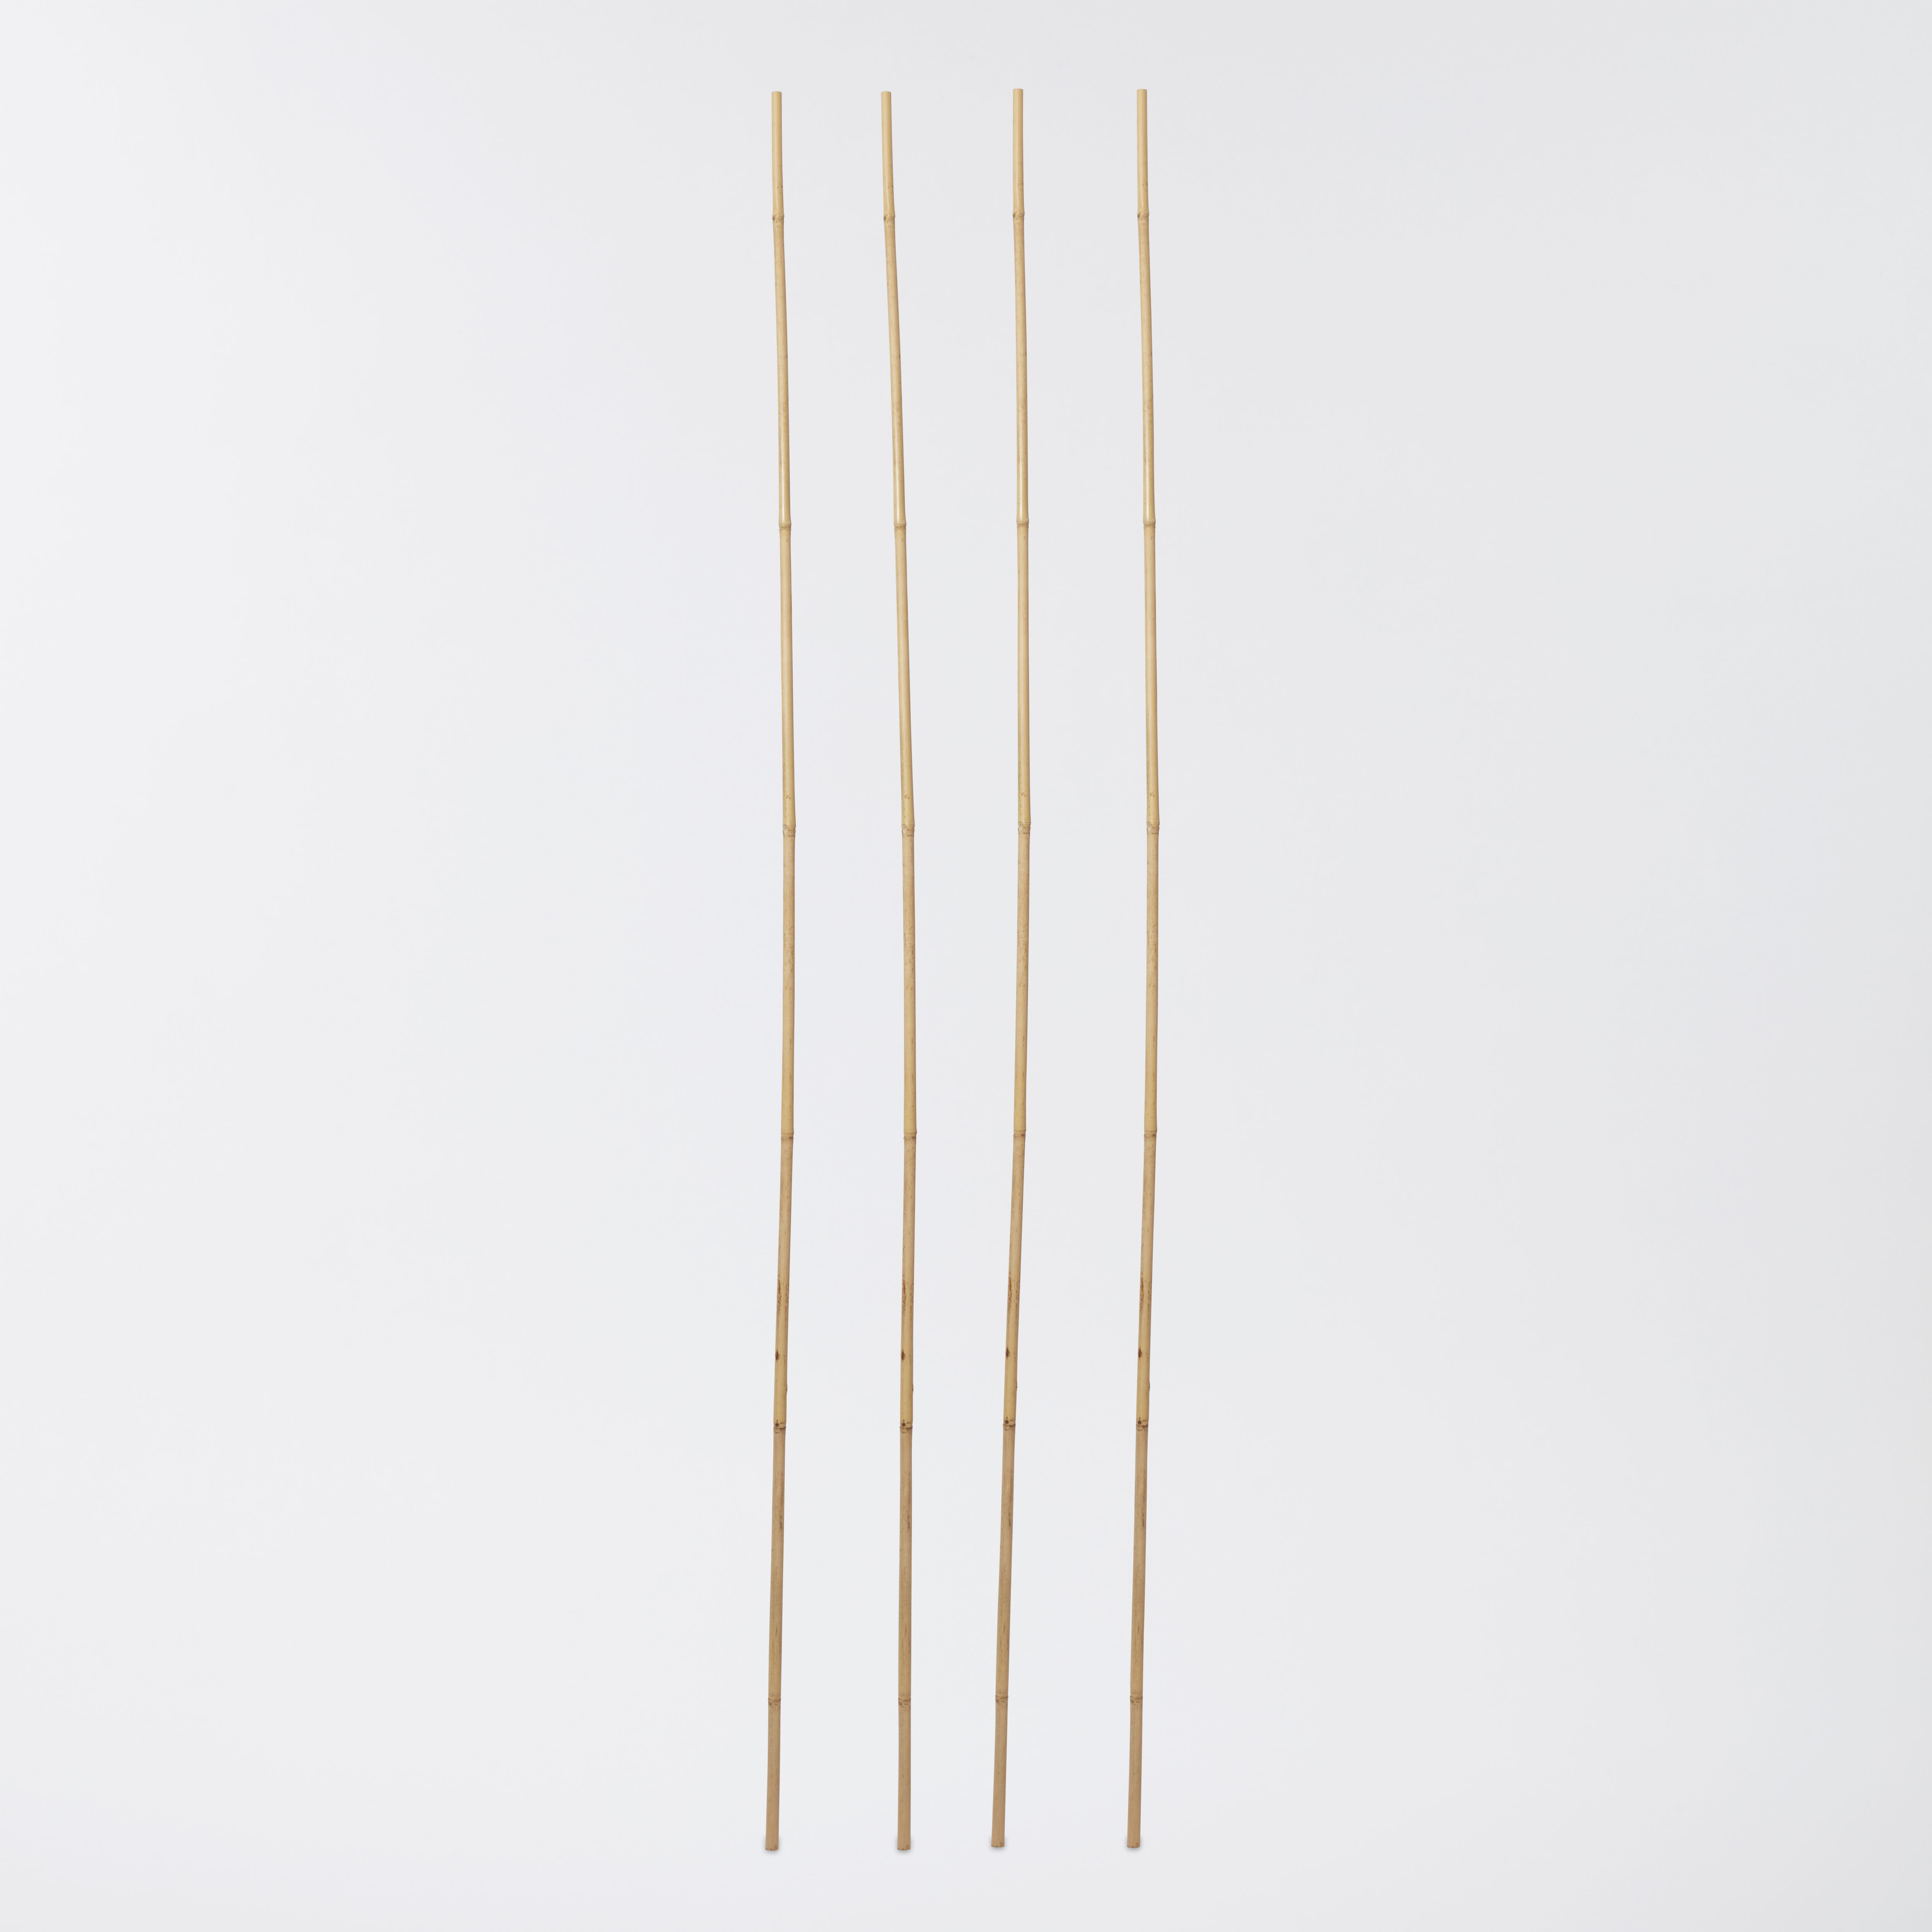 Verve Bamboo Cane 240cm, Pack of 10